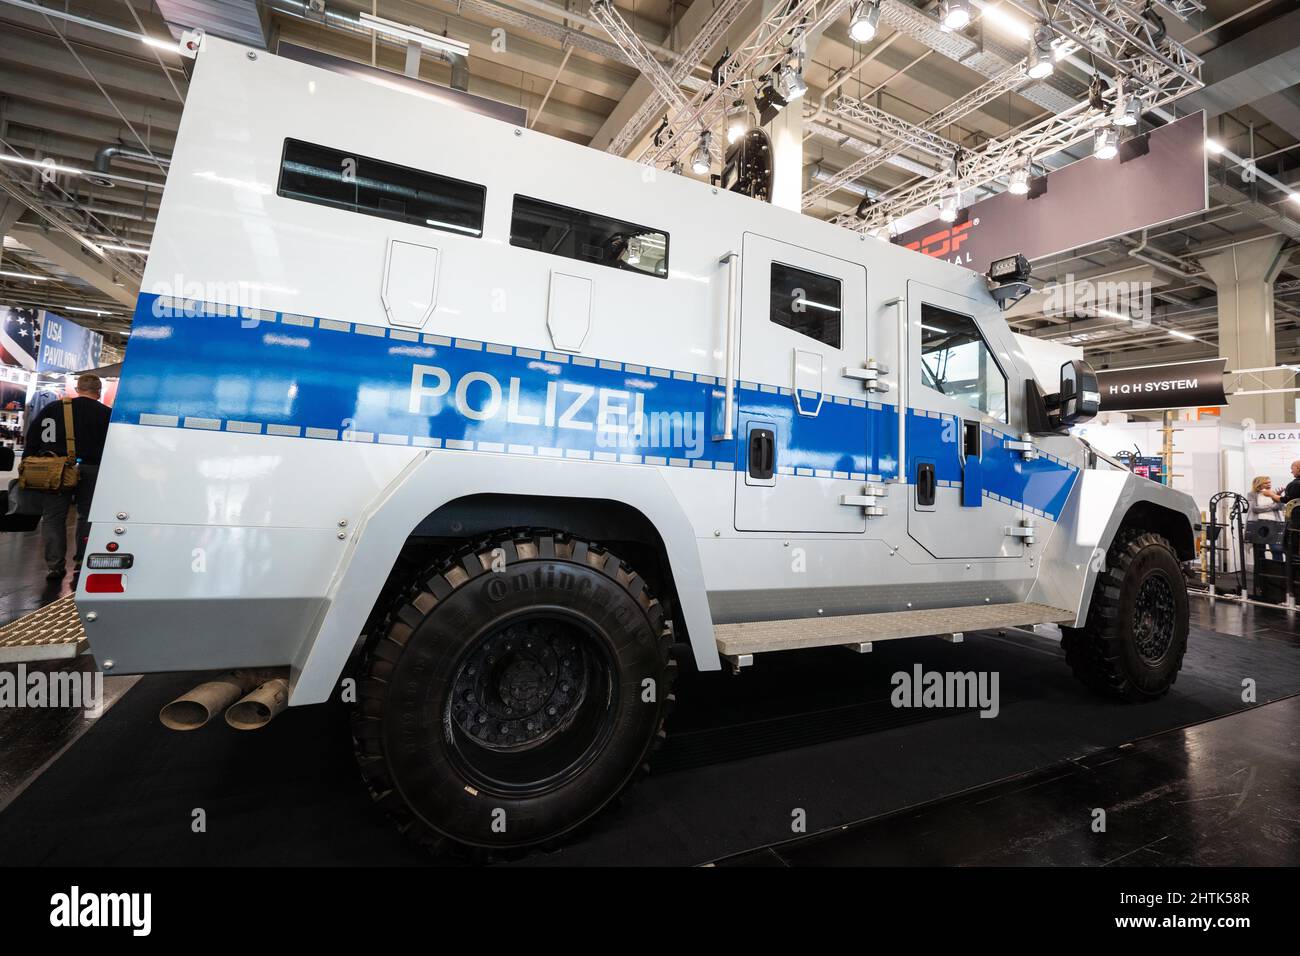 Nuremberg, Germany. 01st Mar, 2022. The armored vehicle of the type 'ATT (Armored Tactical Truck)' of the company 'STOOF' is exhibited at the fair 'Enforce Tac'. The ATT is based on a Ford F-550 4x4, can transport up to 10 forces and is an alternative for urban situations due to its higher speed and small size. The 'Enforce Tac' trade show for security technology, with more than 300 exhibitors, will take place on March 1 and 2. Credit: Nicolas Armer/dpa/Alamy Live News Stock Photo